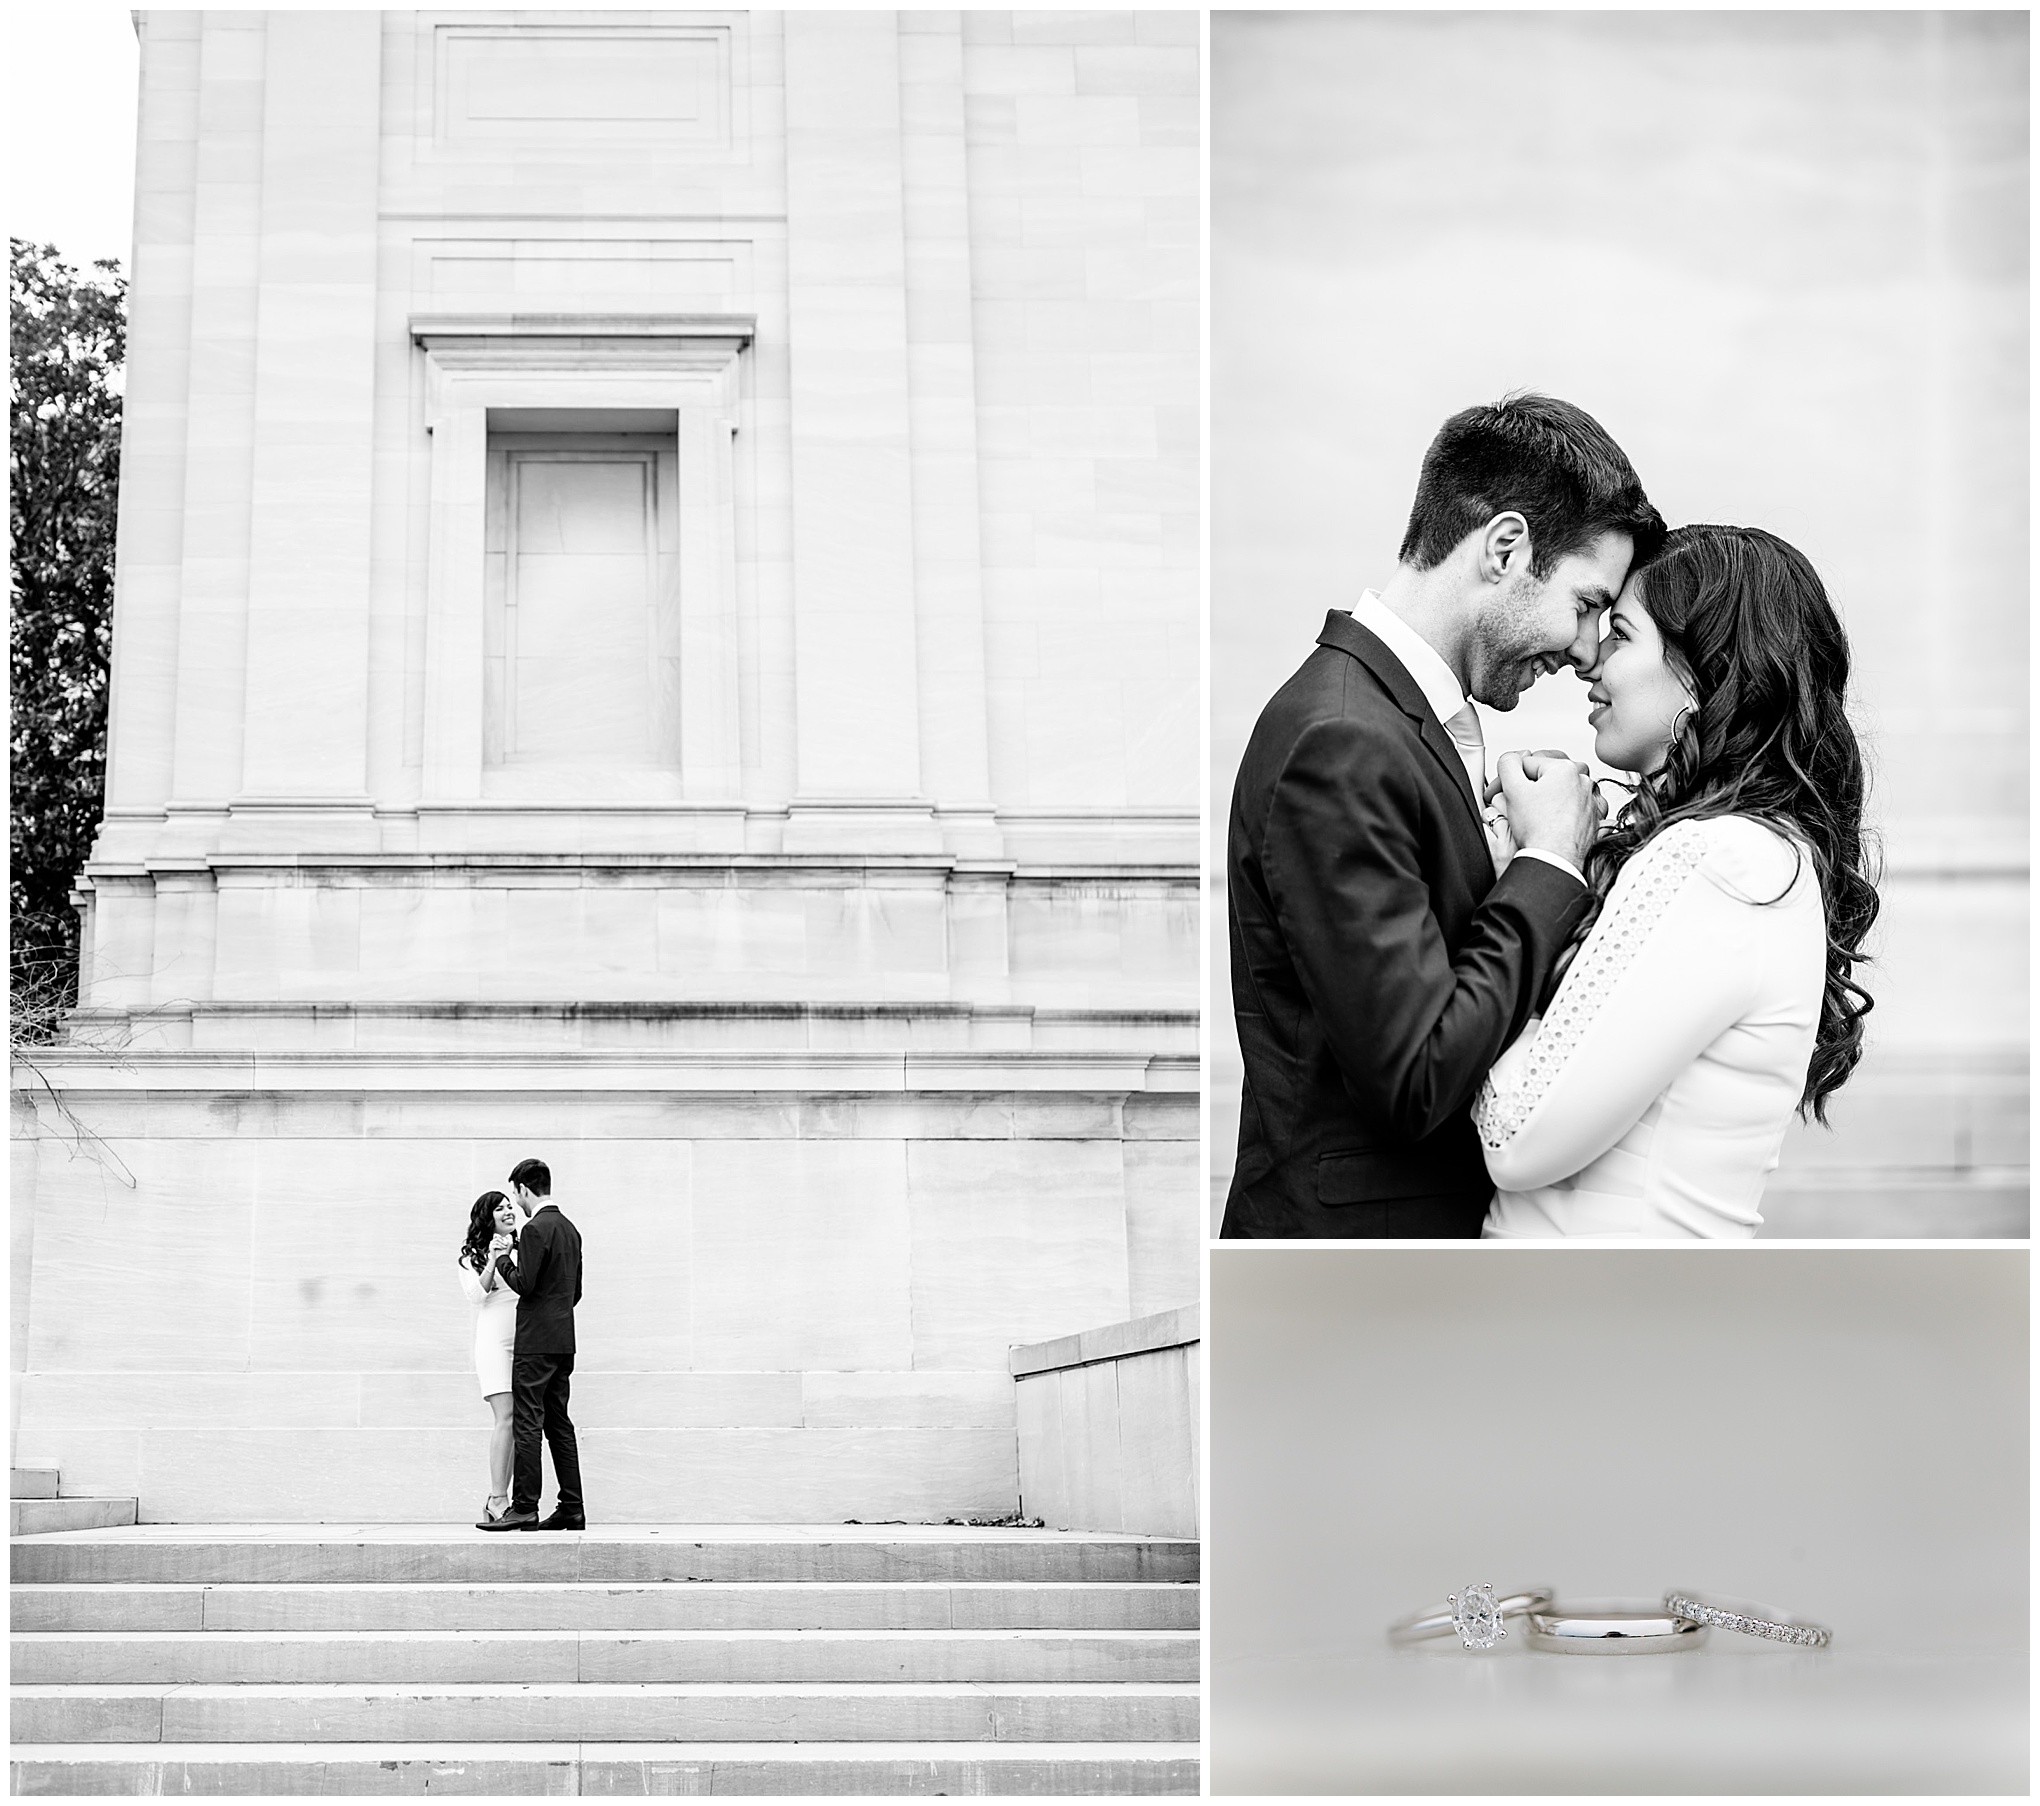 winter National Mall elopement, DC elopement, DC elopement photographer, DC wedding photographer, DC wedding portraits, National mall portraits, National Mall elopement, Rachel E.H. Photography, Capitol Hill, newlywed portraits, National Gallery of Art, black and white wedding portraits, wedding rings